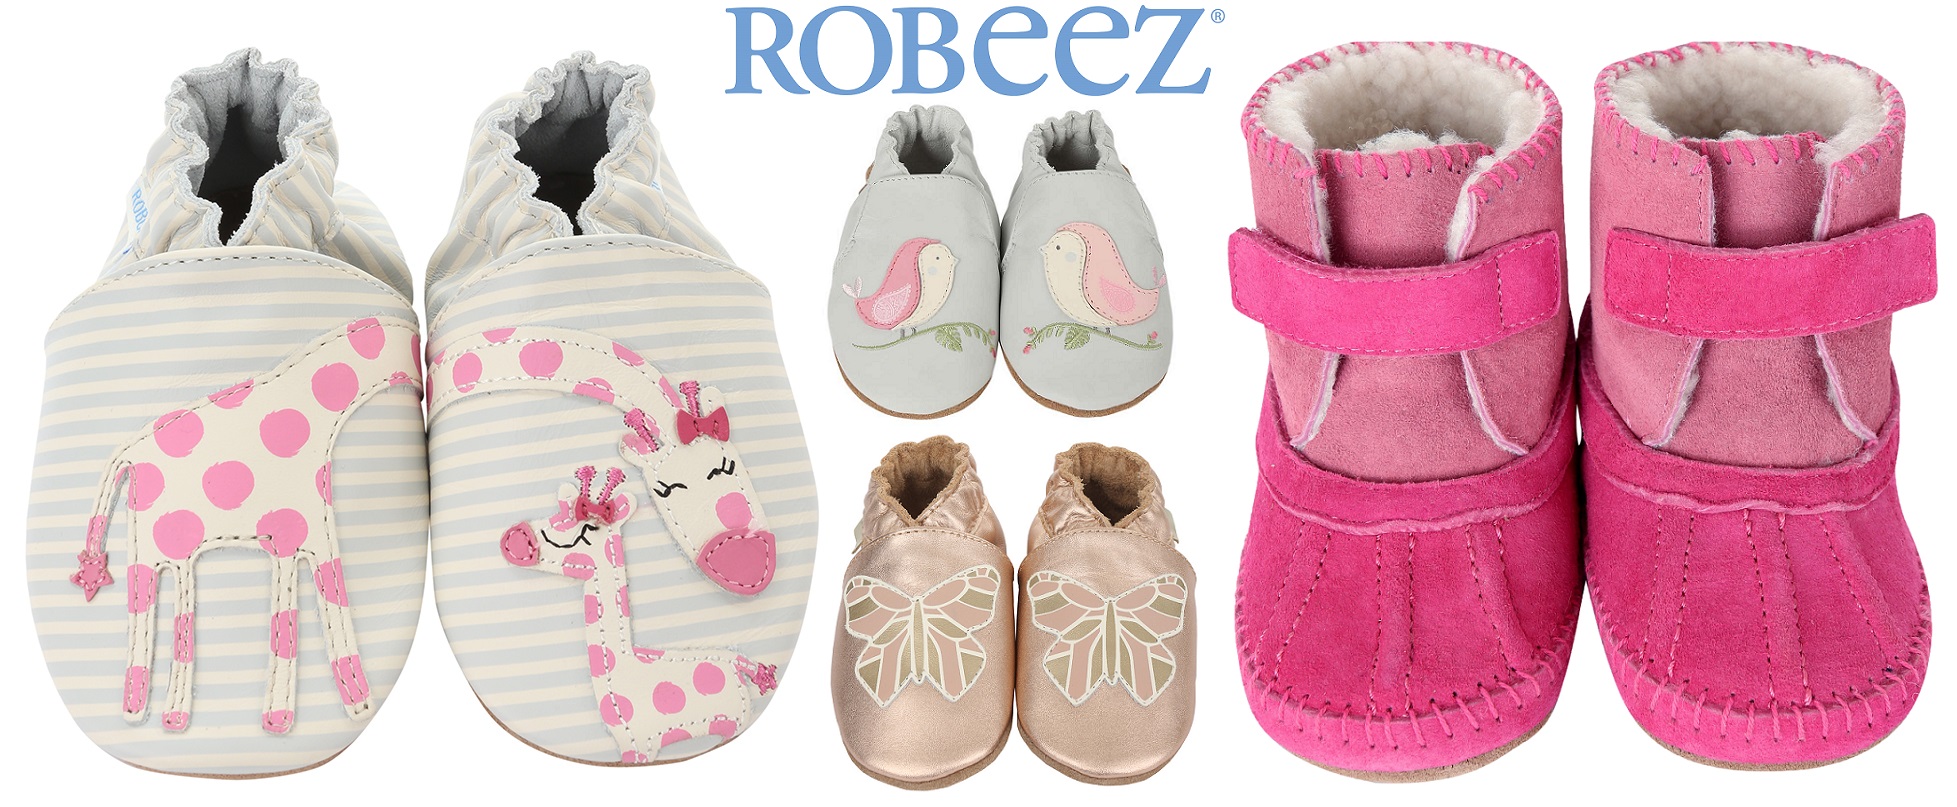 robeez baby shoes